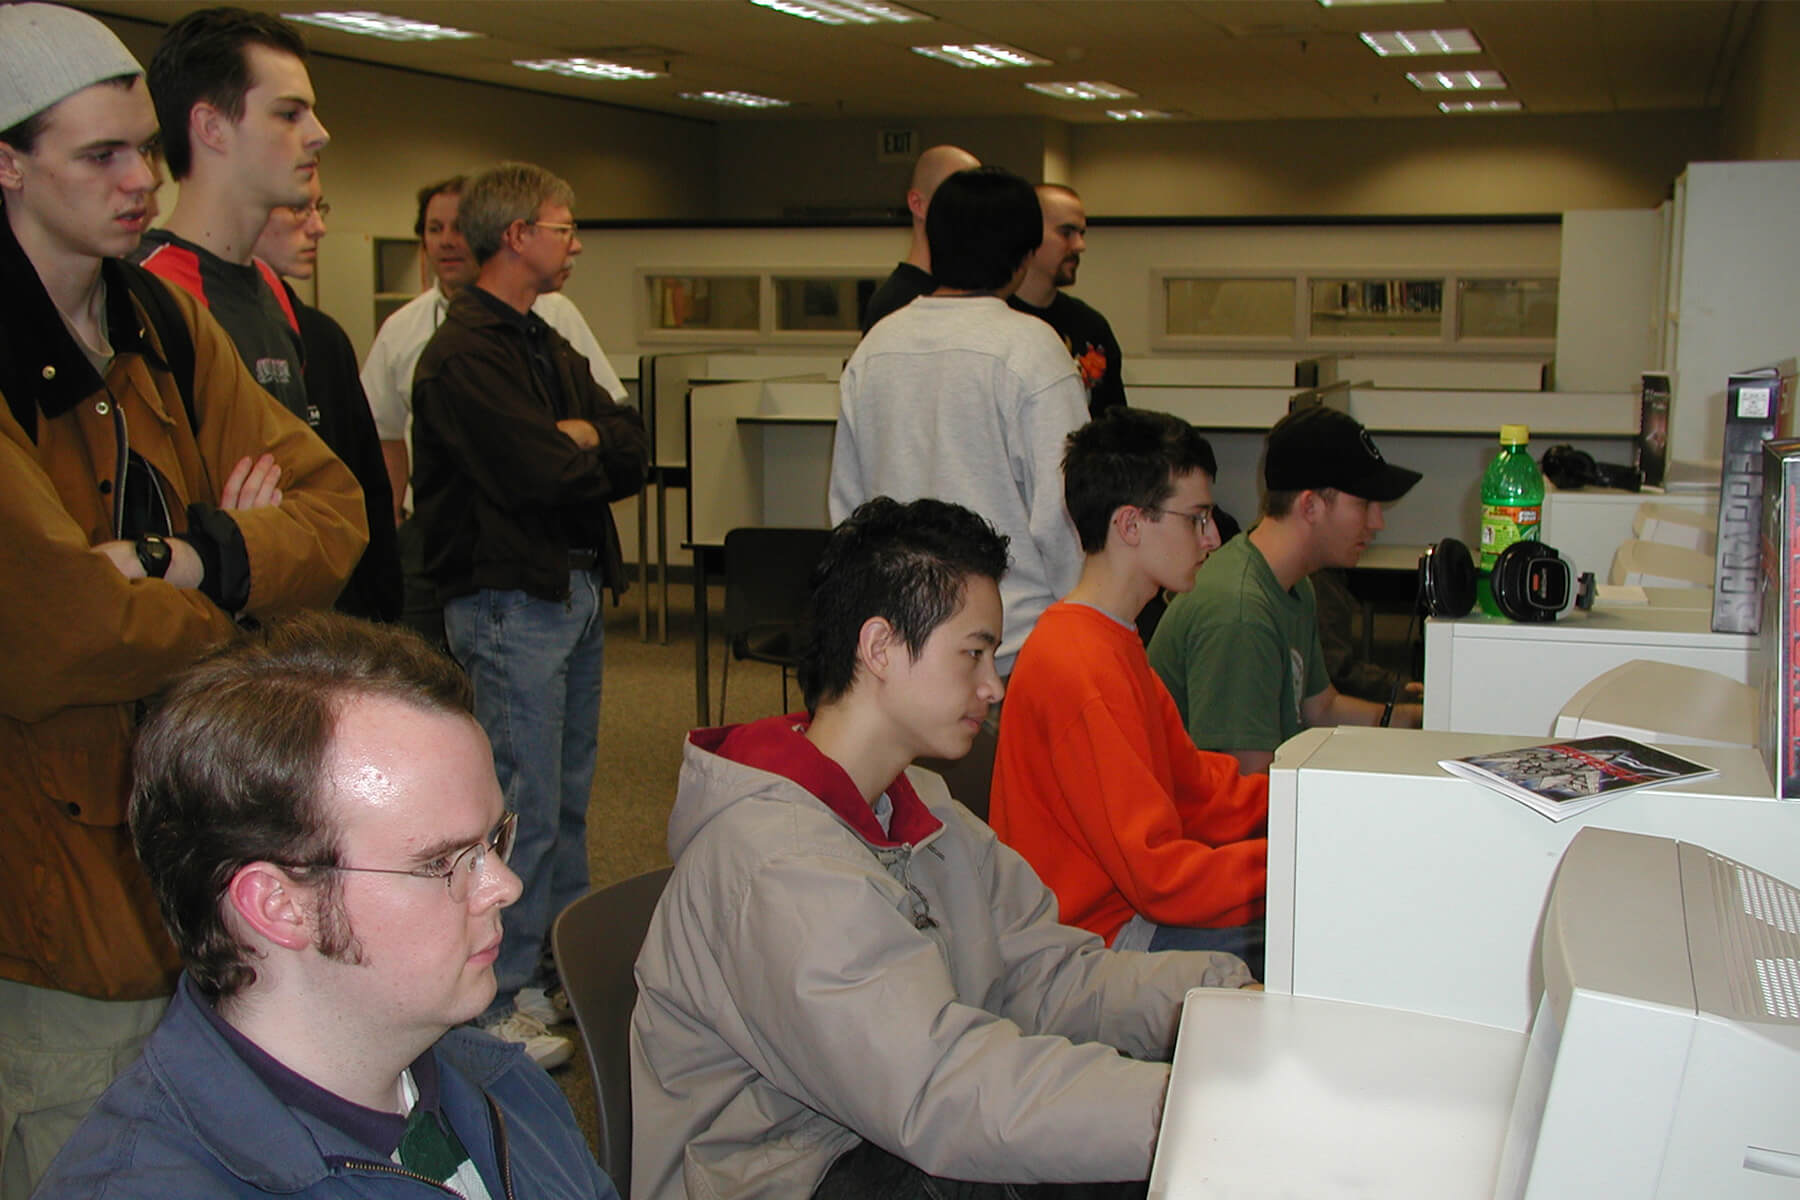 Students and instuctors looking at computer screens.